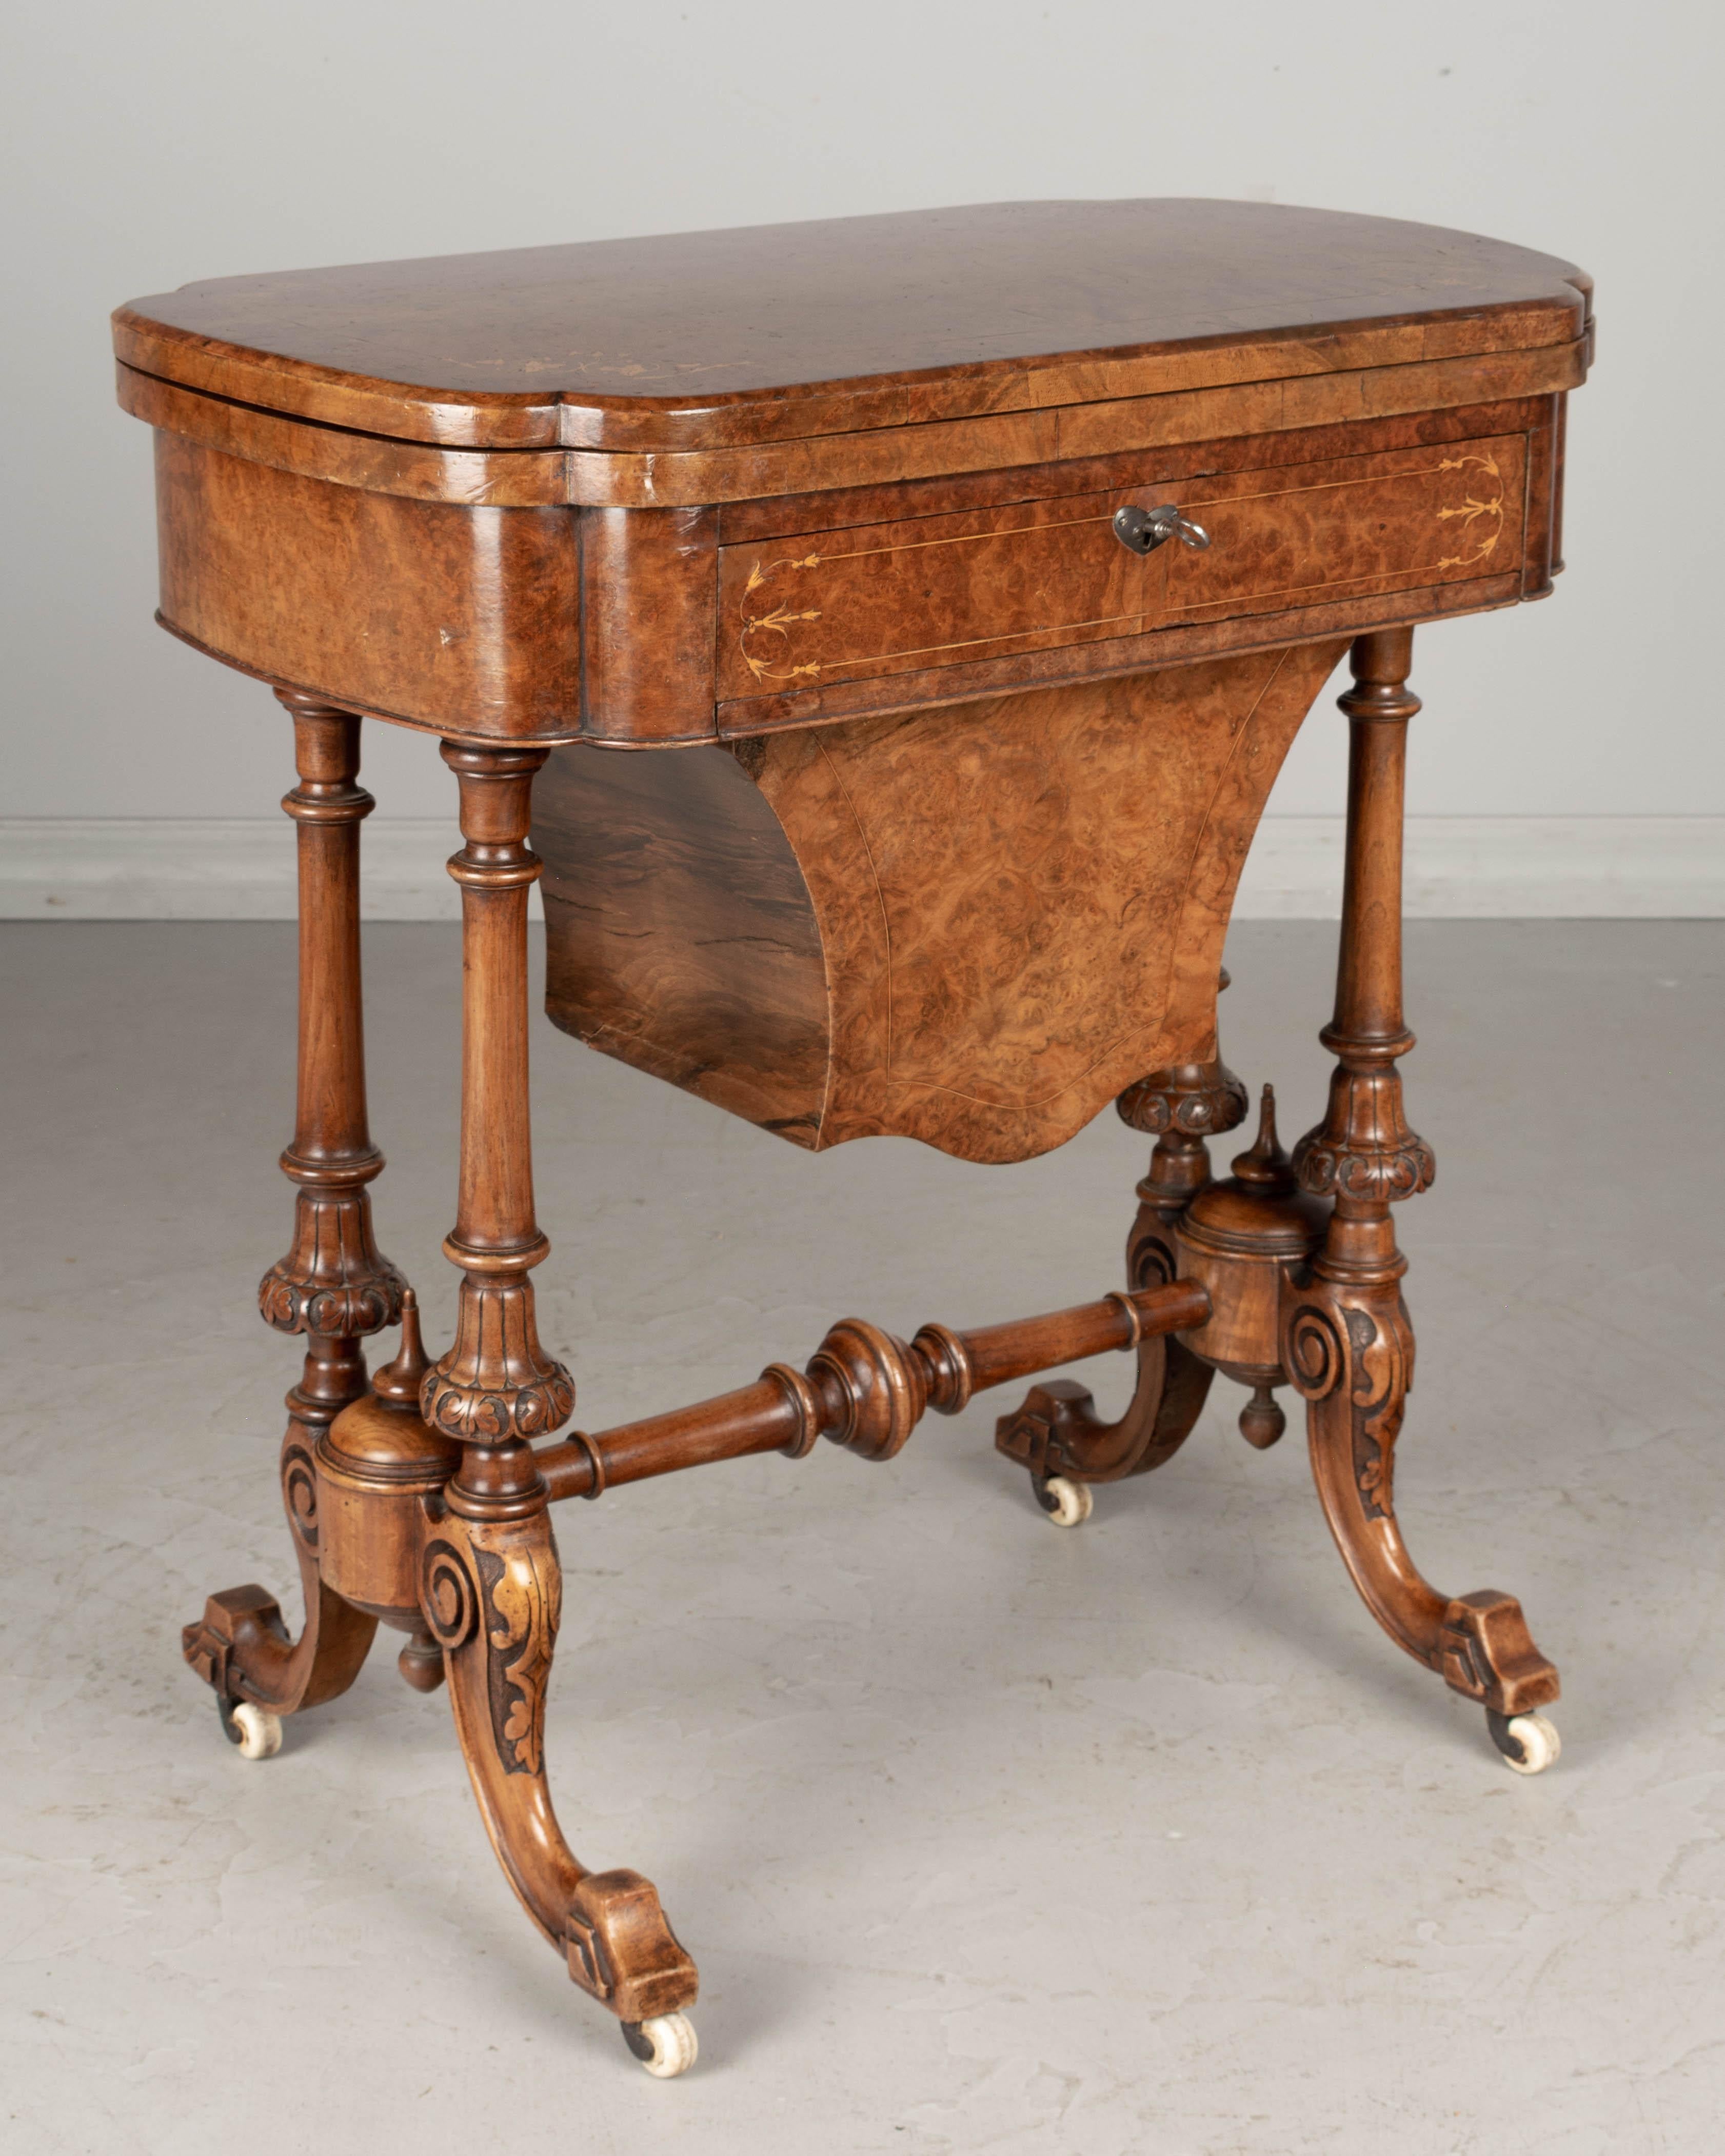 A fine quality 19th century English Victorian game table made of inlaid veneer of maple and solid mahogany. The swivel flip top hinges opens to reveal three inlaid game playing surfaces: backgammon, cribbage and chess boards. Dovetailed frieze